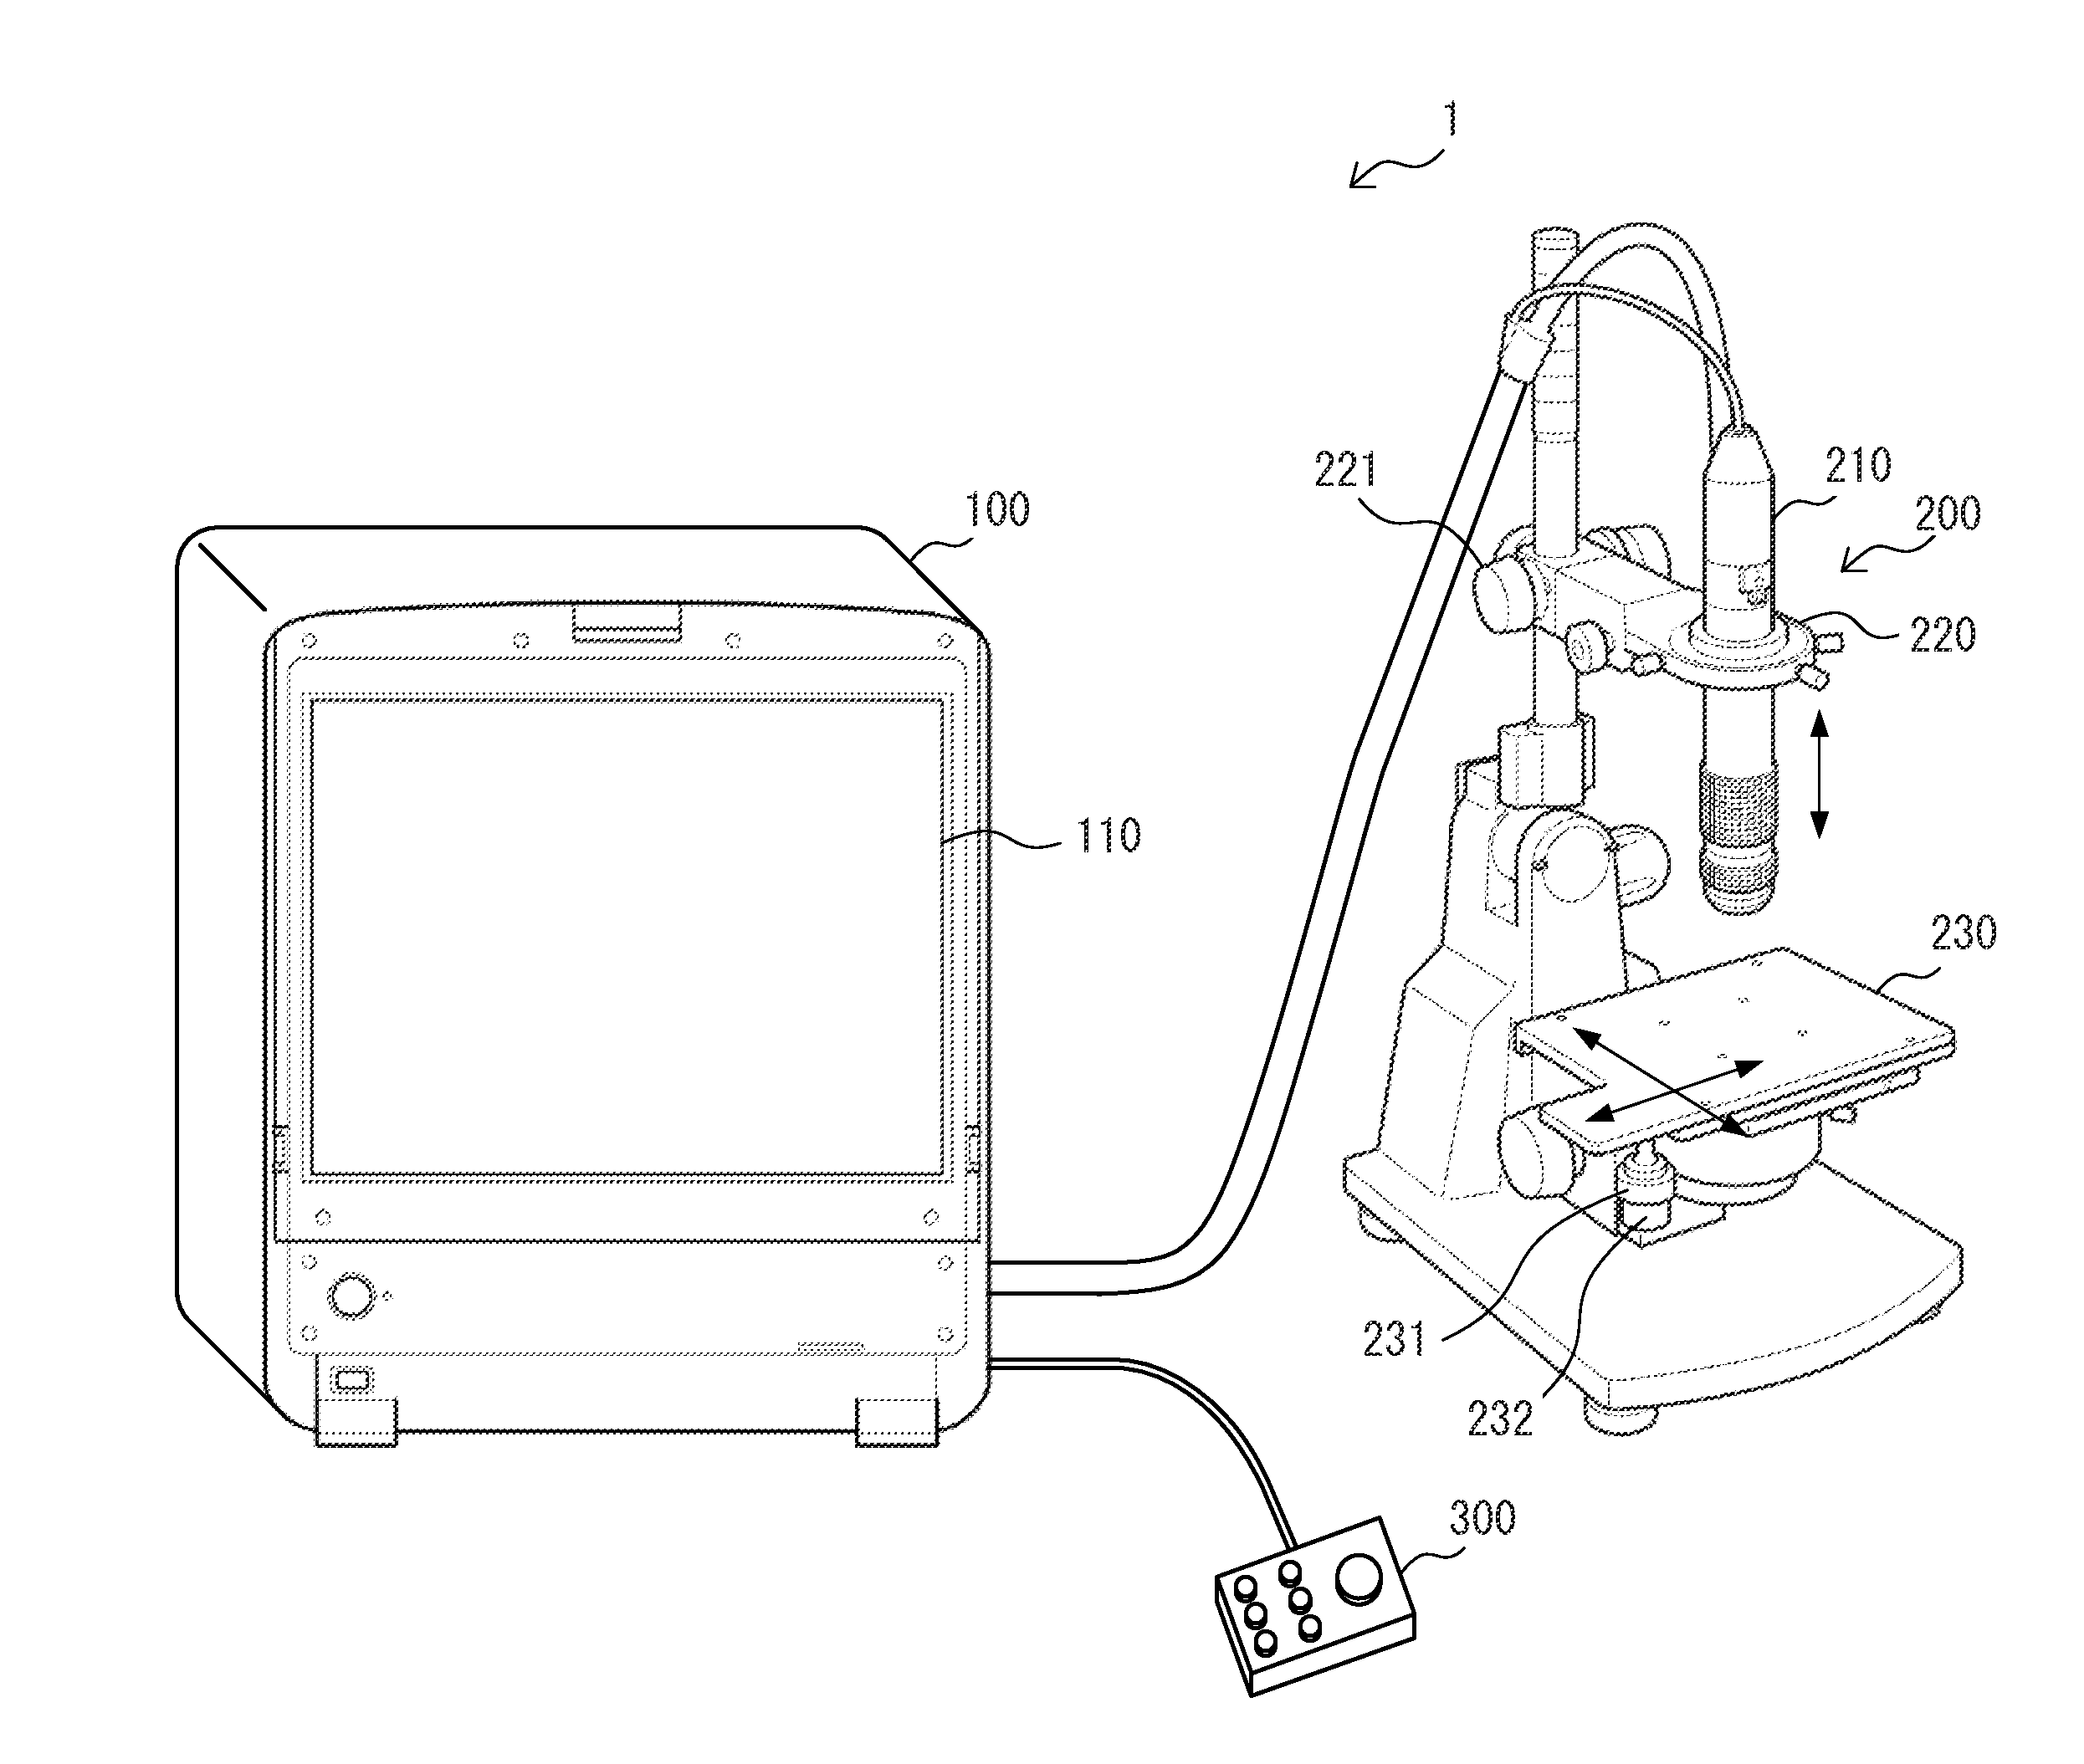 Imaging Device